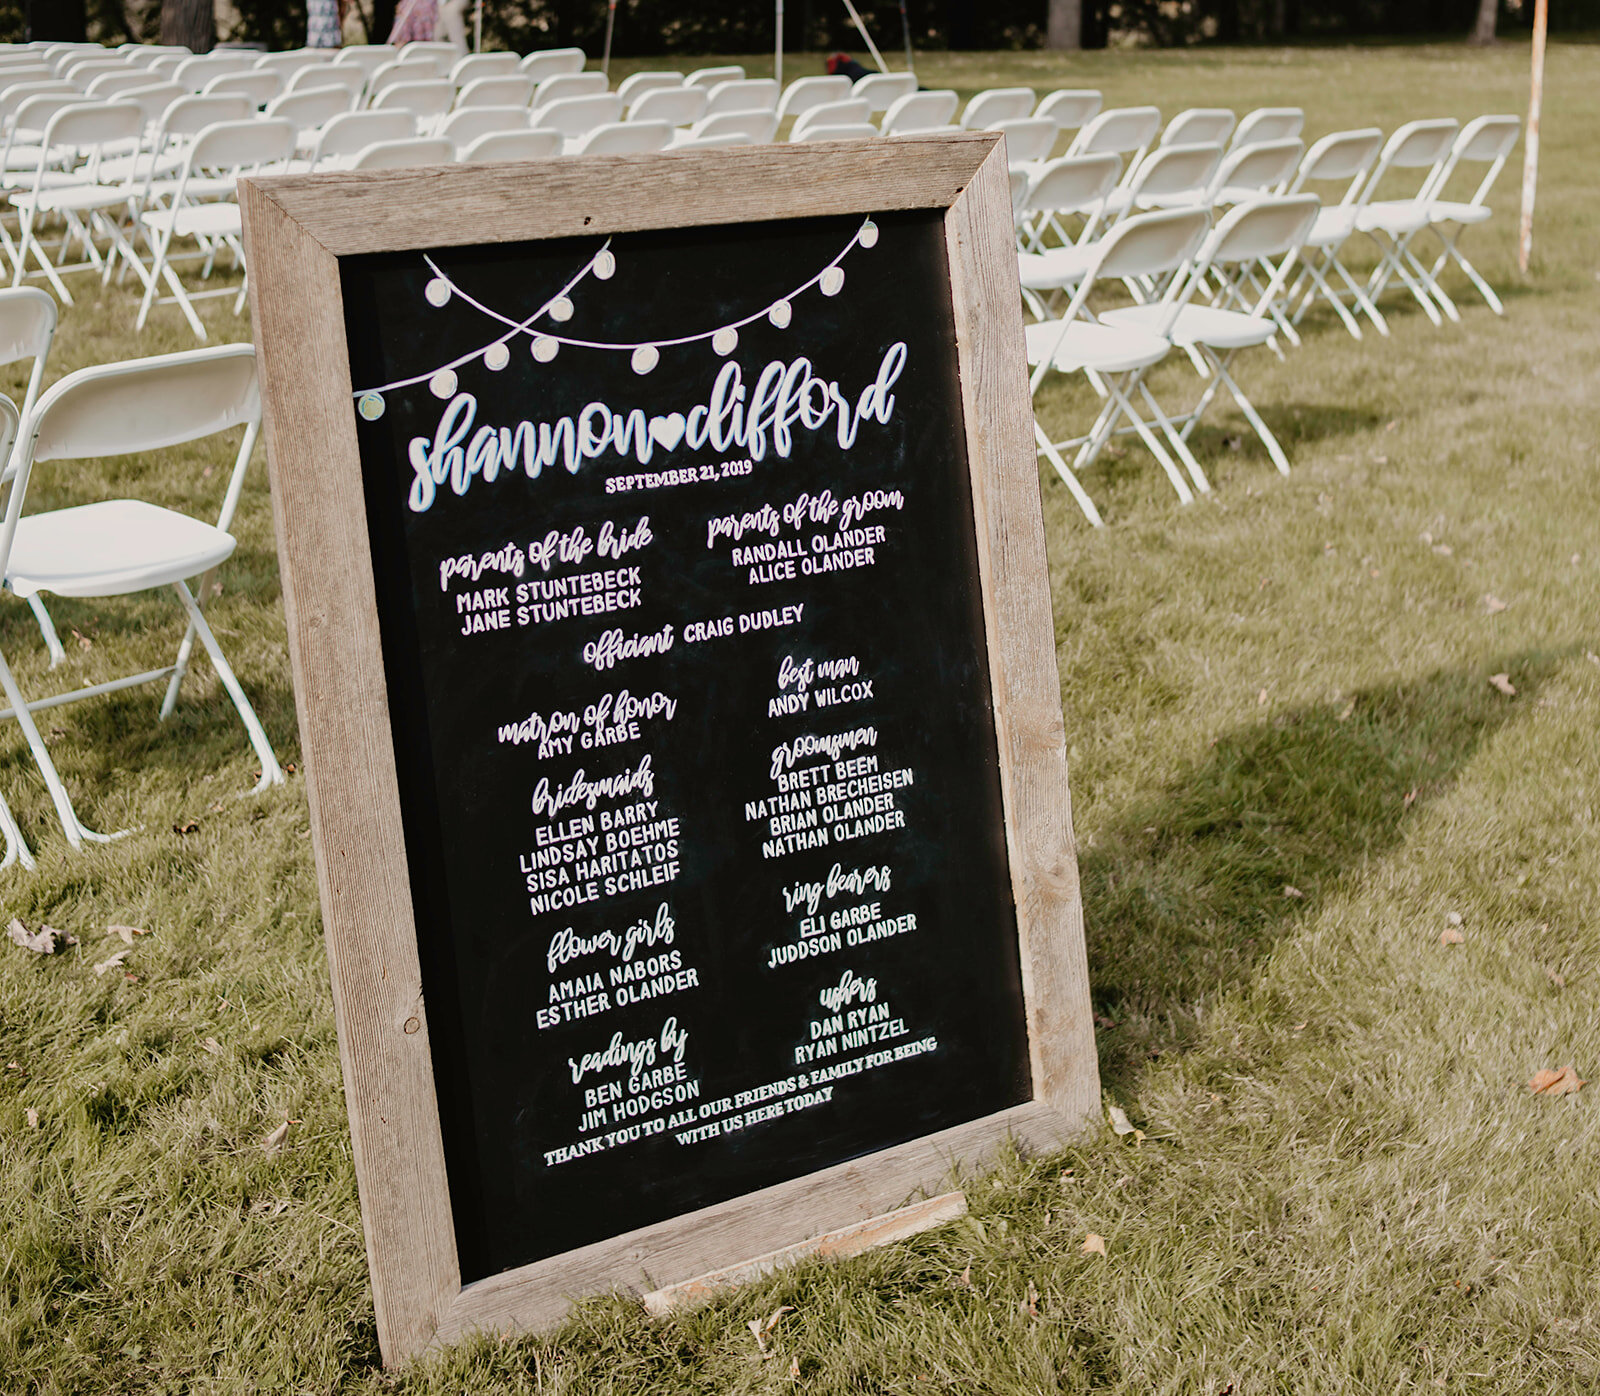 Grab a Drink and Find Your Seat Sign - Wedding Seating Plan Signage -  Cocktail Seating Chart - Beer Escort Cards - Wine Place Cards Sign